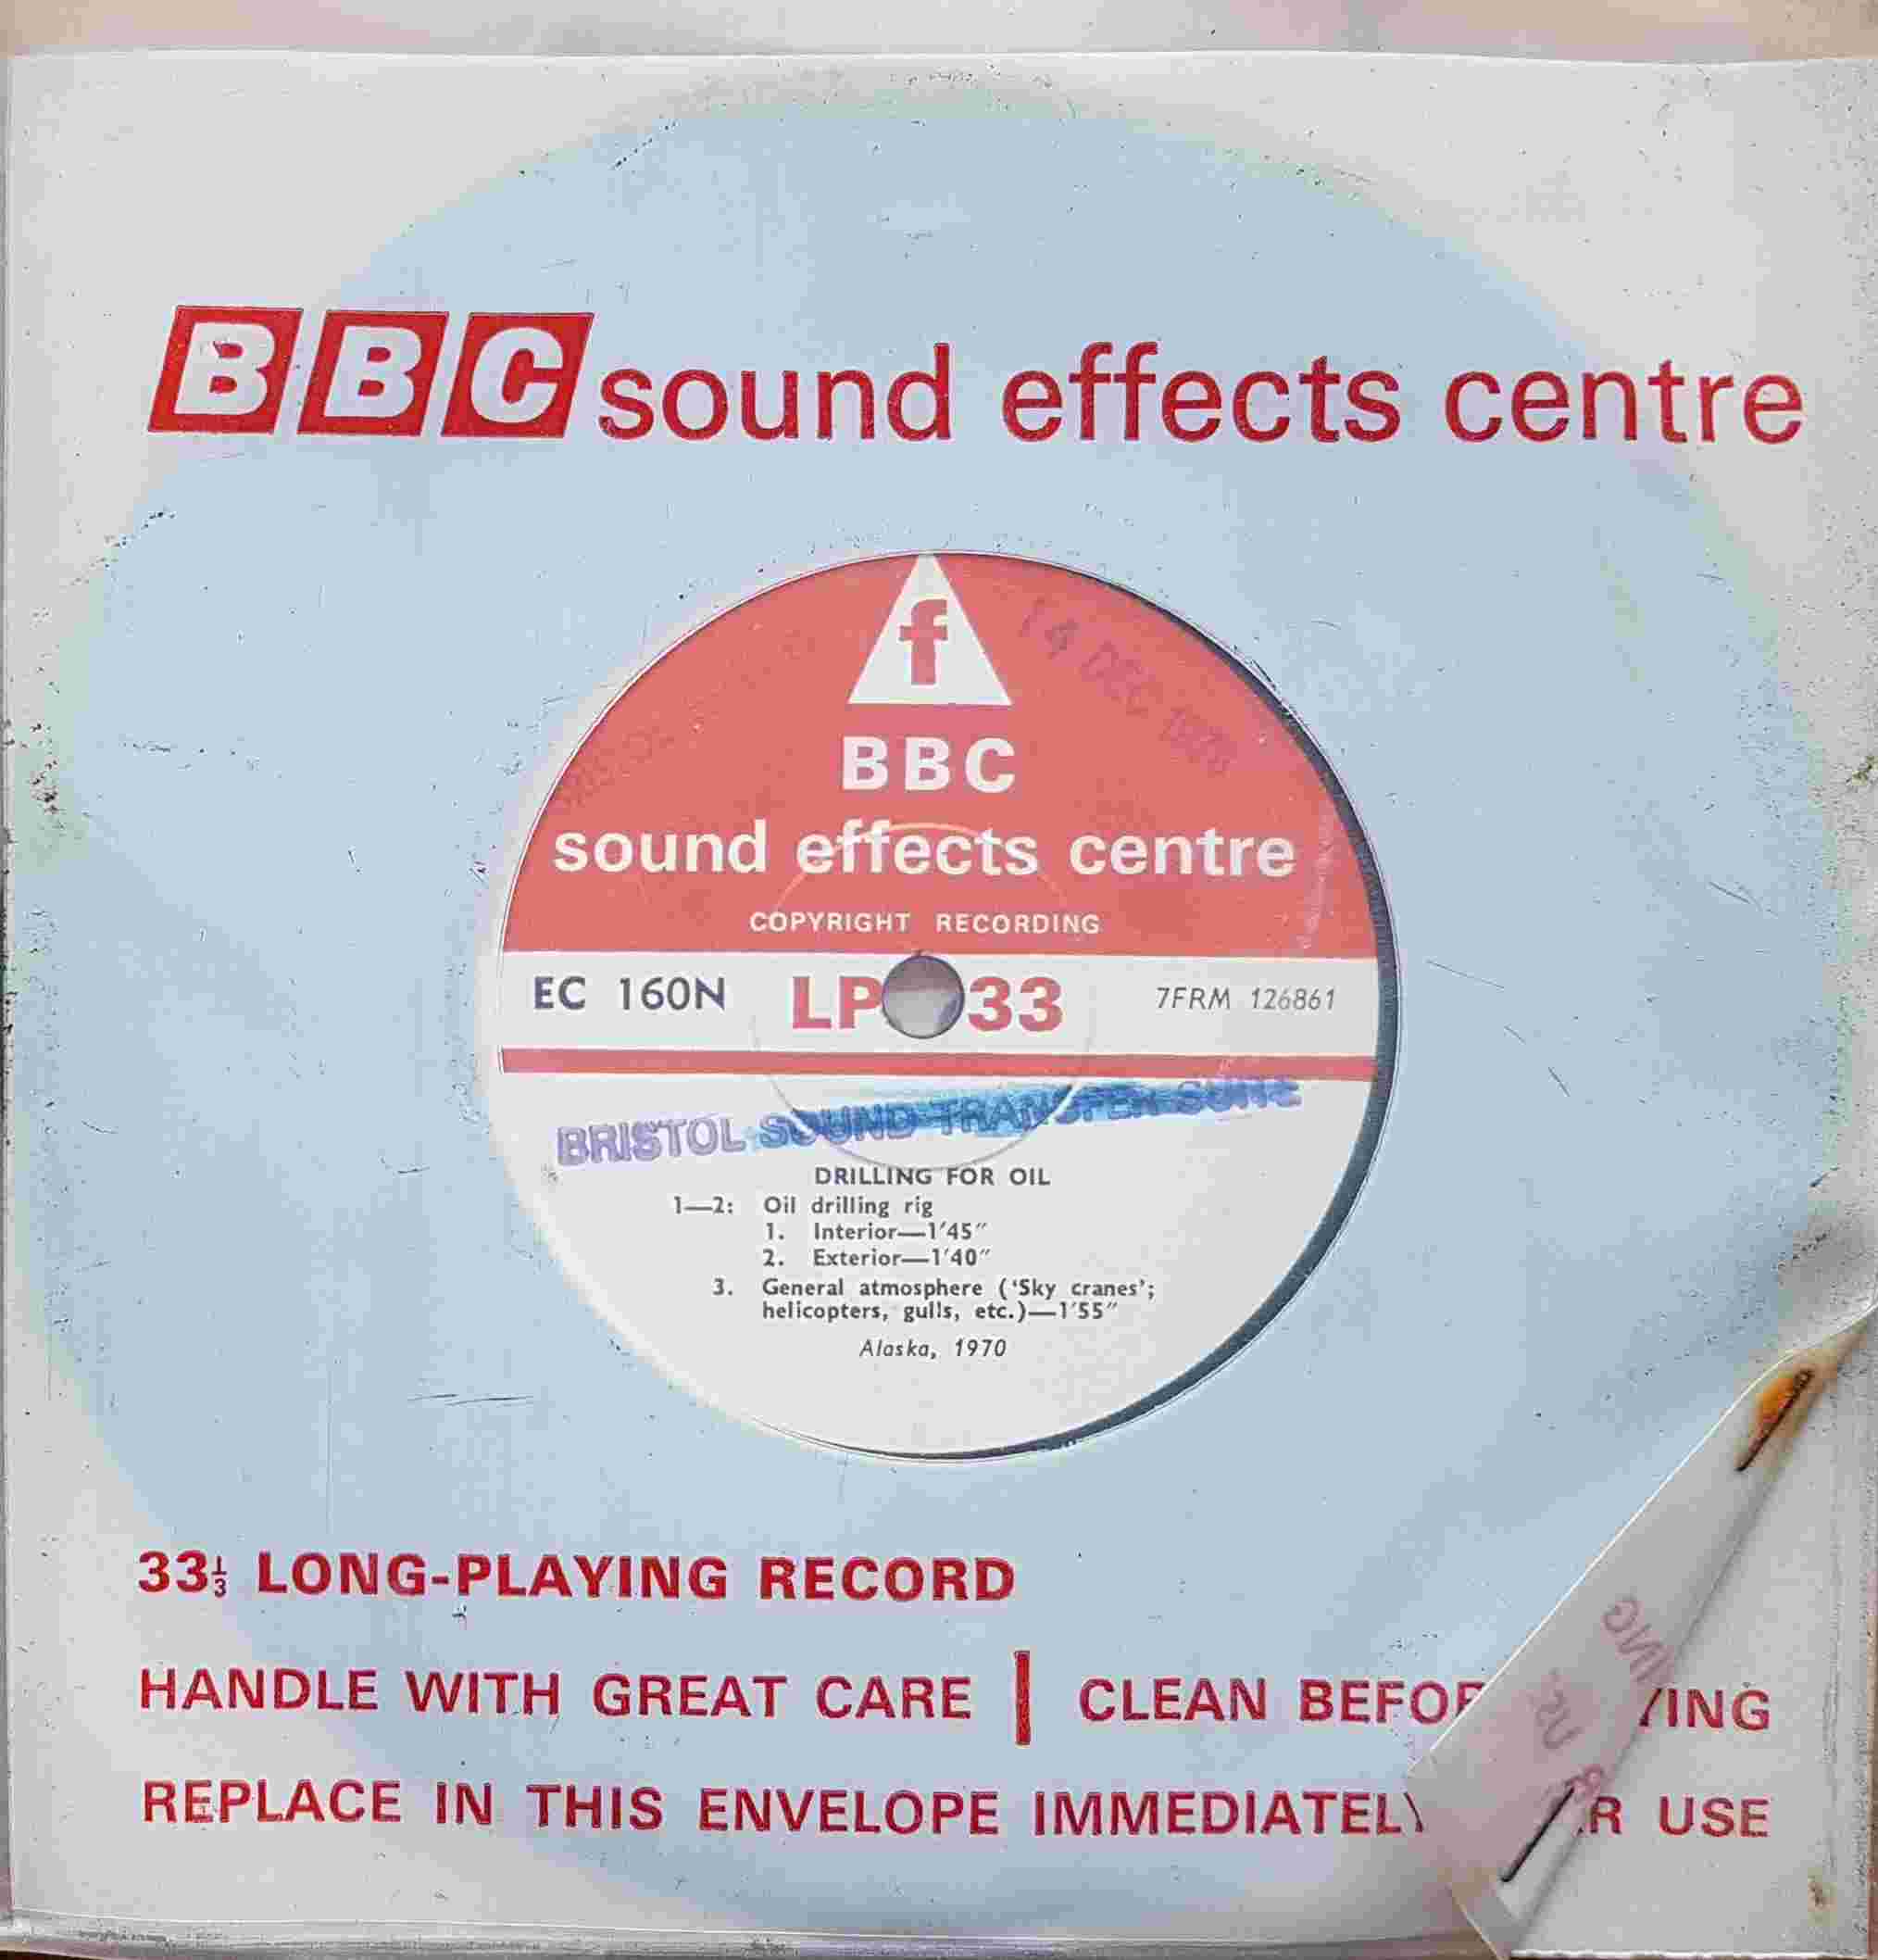 Picture of EC 160N Drilling for oil by artist Not registered from the BBC singles - Records and Tapes library